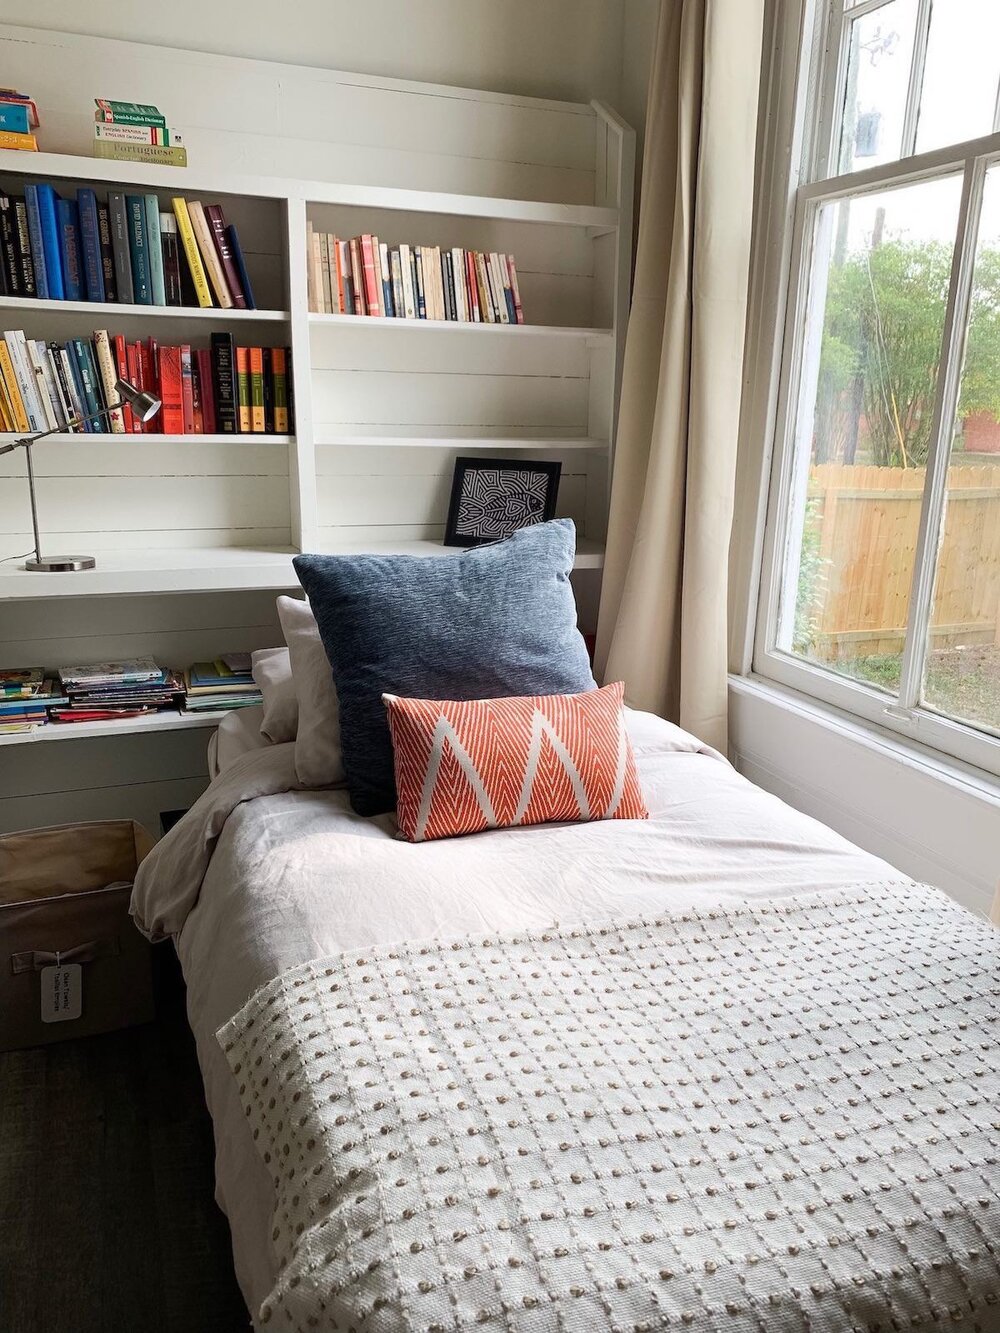 twin bed and bookshelves